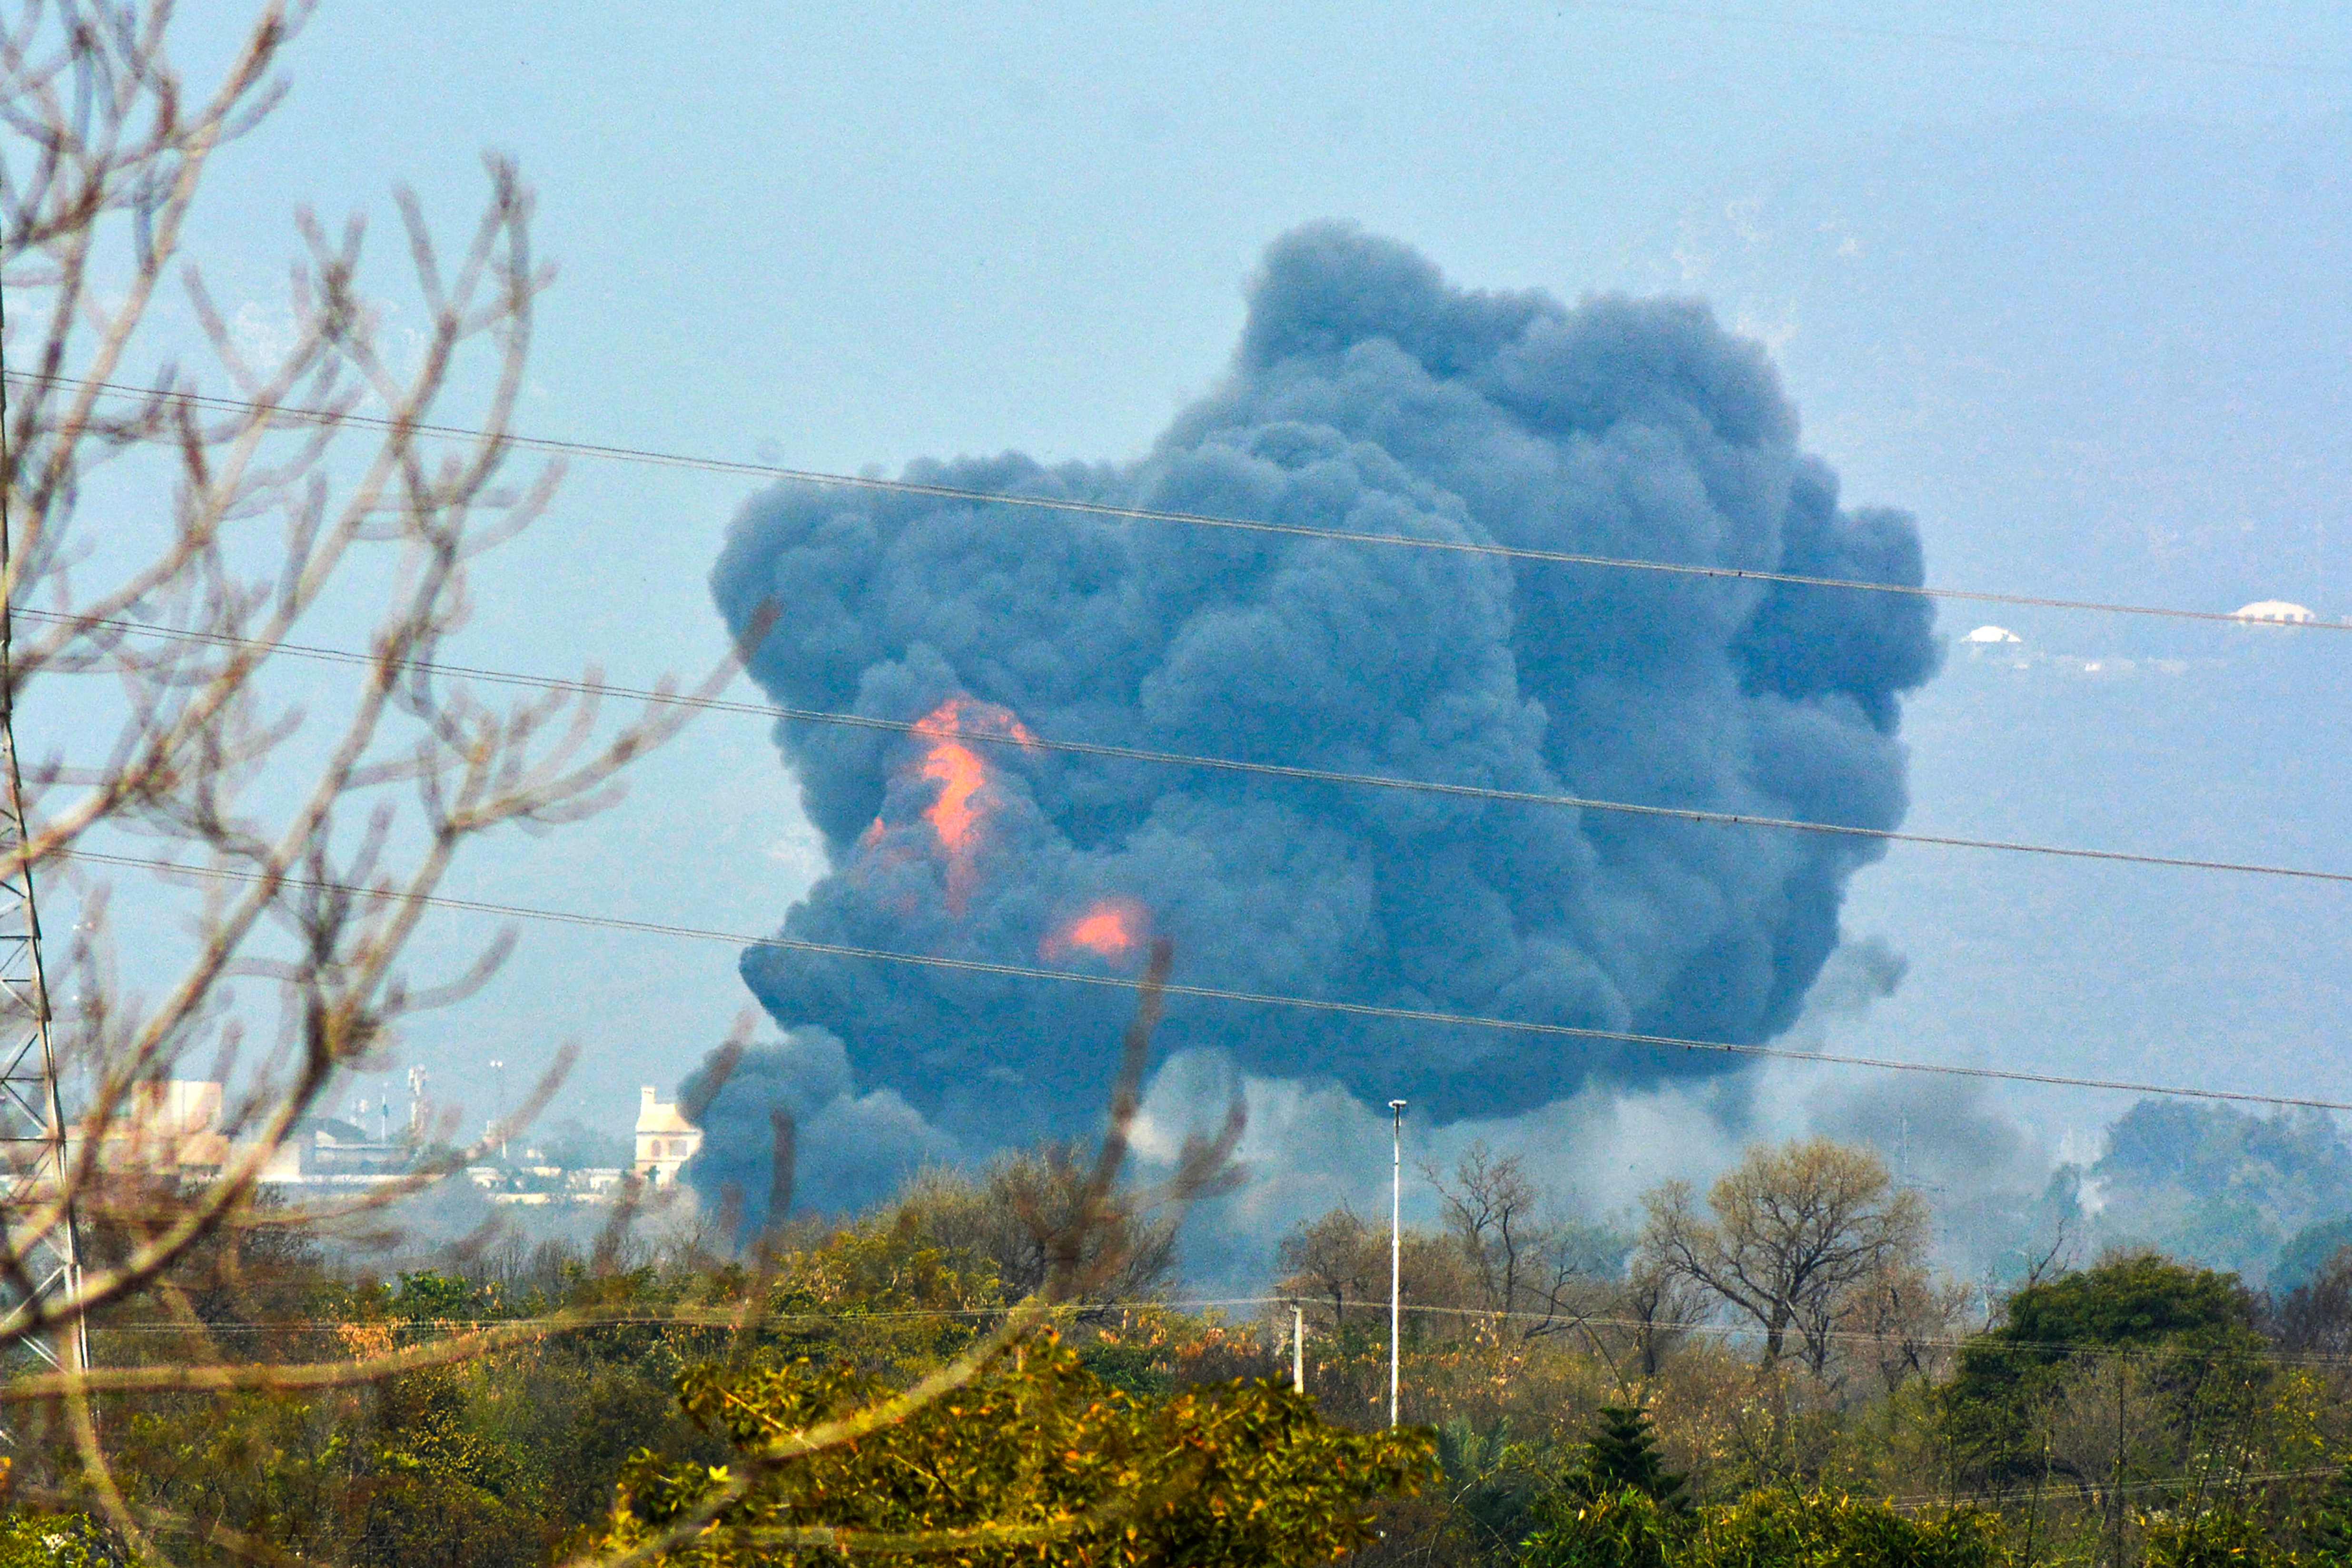 TOPSHOT - A plume of smoke and fire are seen coming from an area after a Pakistani F-16 crashed during a rehearsal ahead of Pakistan Day military parade in Islamabad on March 11, 2020. - A Pakistani F-16 fighter jet crashed in Islamabad on March 11 in an apparent accident during a rehearsal for an upcoming military parade in the capital, officials said. (Photo by STR / AFP)